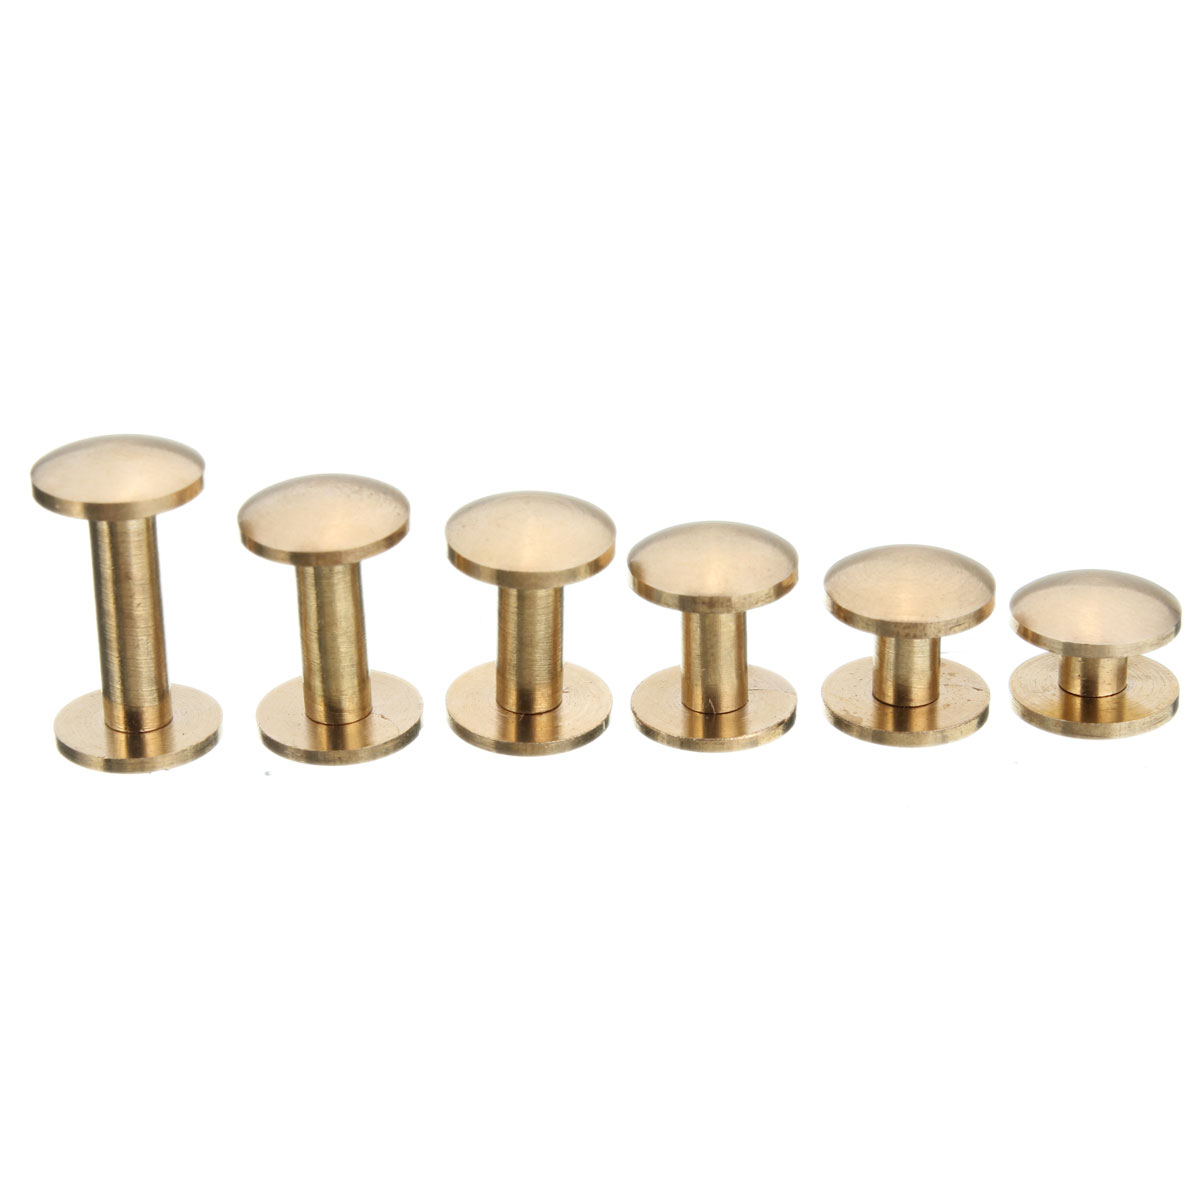 Solid-Brass-Arc-Button-Stud-Screw-Nail-4-15mm-Screw-Back-Leather-Belt-Button-Screws-1034256-1